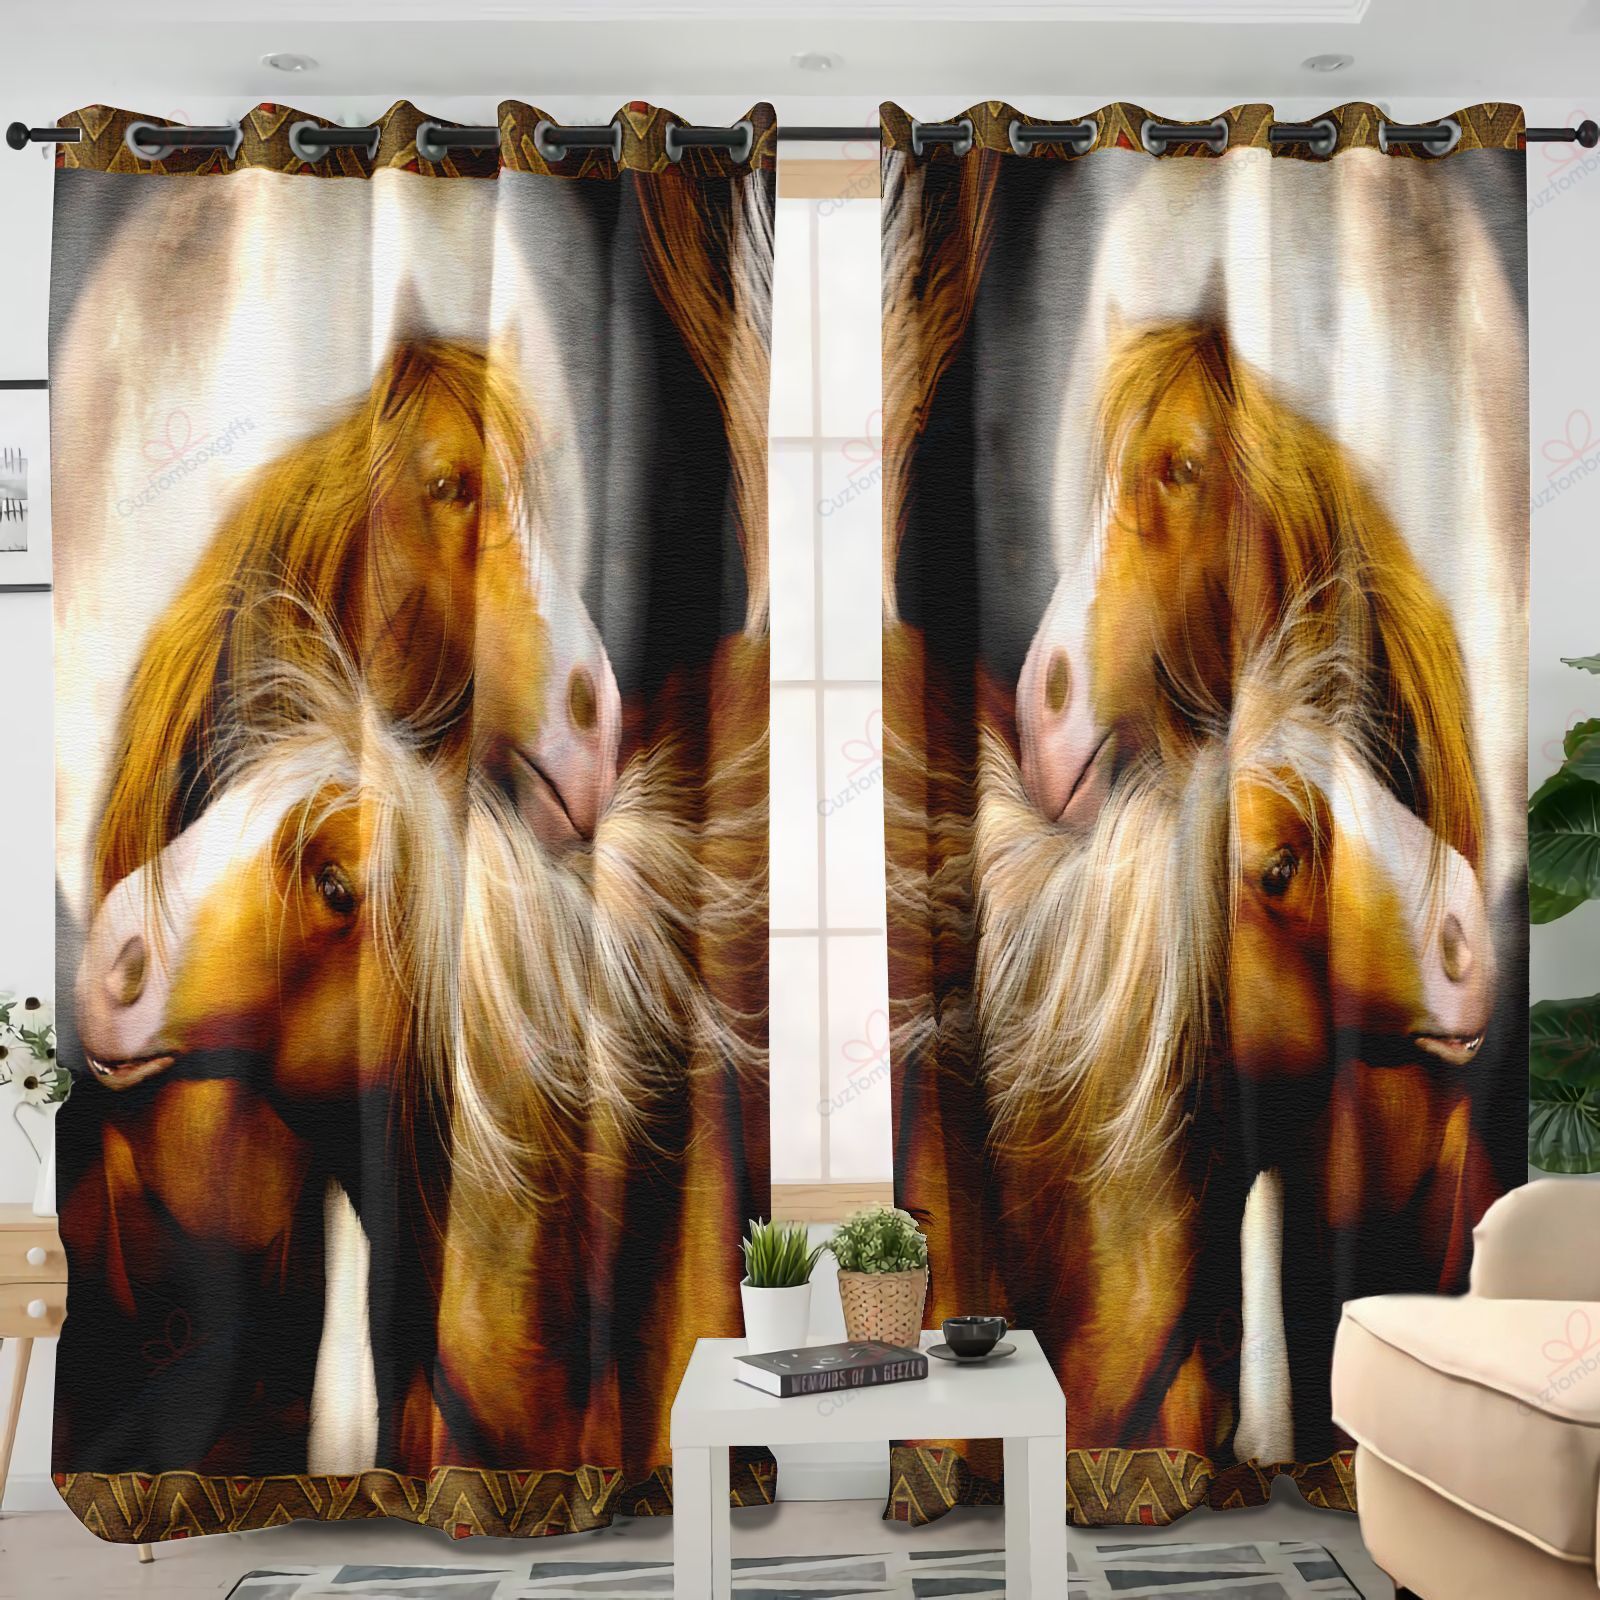 Couple Of Horse Printed Window Curtain Home Decor